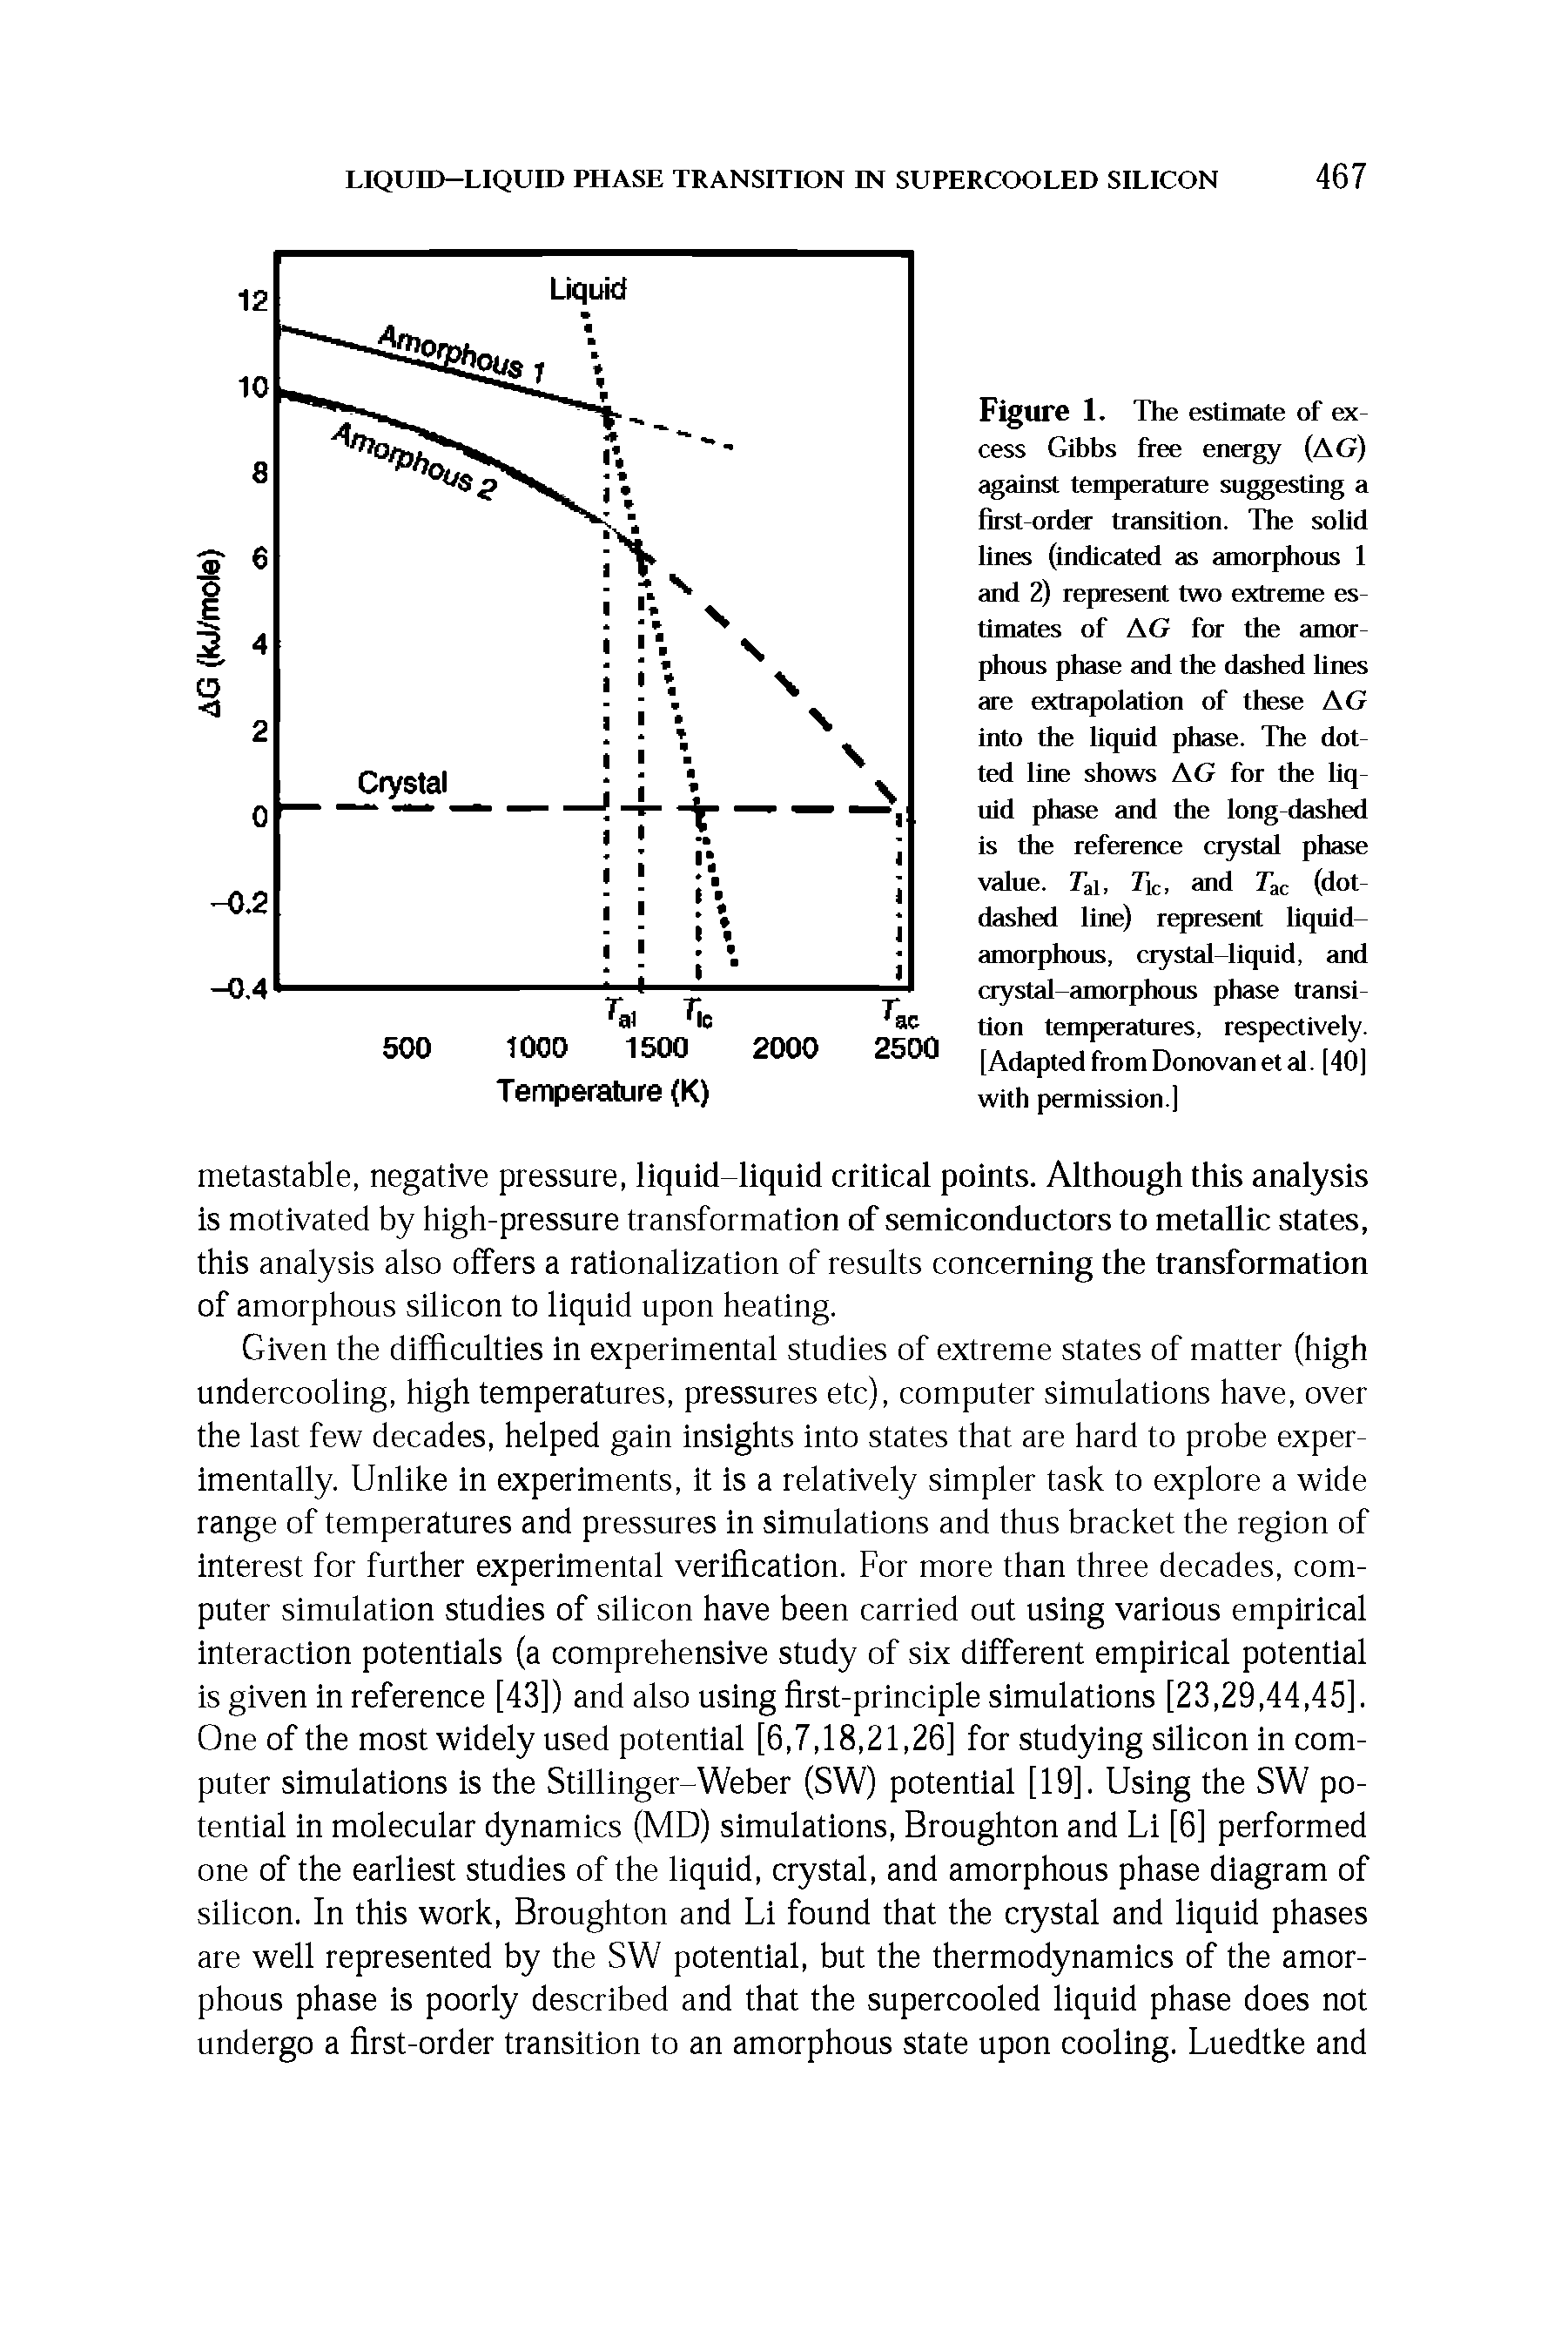 Figure 1. The estimate of excess Gibbs free energy (AG) against temperature suggesting a first-order transition. The solid lines (indicated as amorphous 1 and 2) represent two extreme estimates of AG for the amorphous phase and the dashed lines are extrapolation of these AG into the liquid phase. The dotted line shows AG for the liquid phase and the long-dashed is the reference crystal phase value. Tai, Tic, and Tac (dot-dashed line) represent liquid-amorphous, crystal-liquid, and oystal-amorphous phase transition temperatures, respectively. [Adapted from Donovan et al. [40] with permission.)...